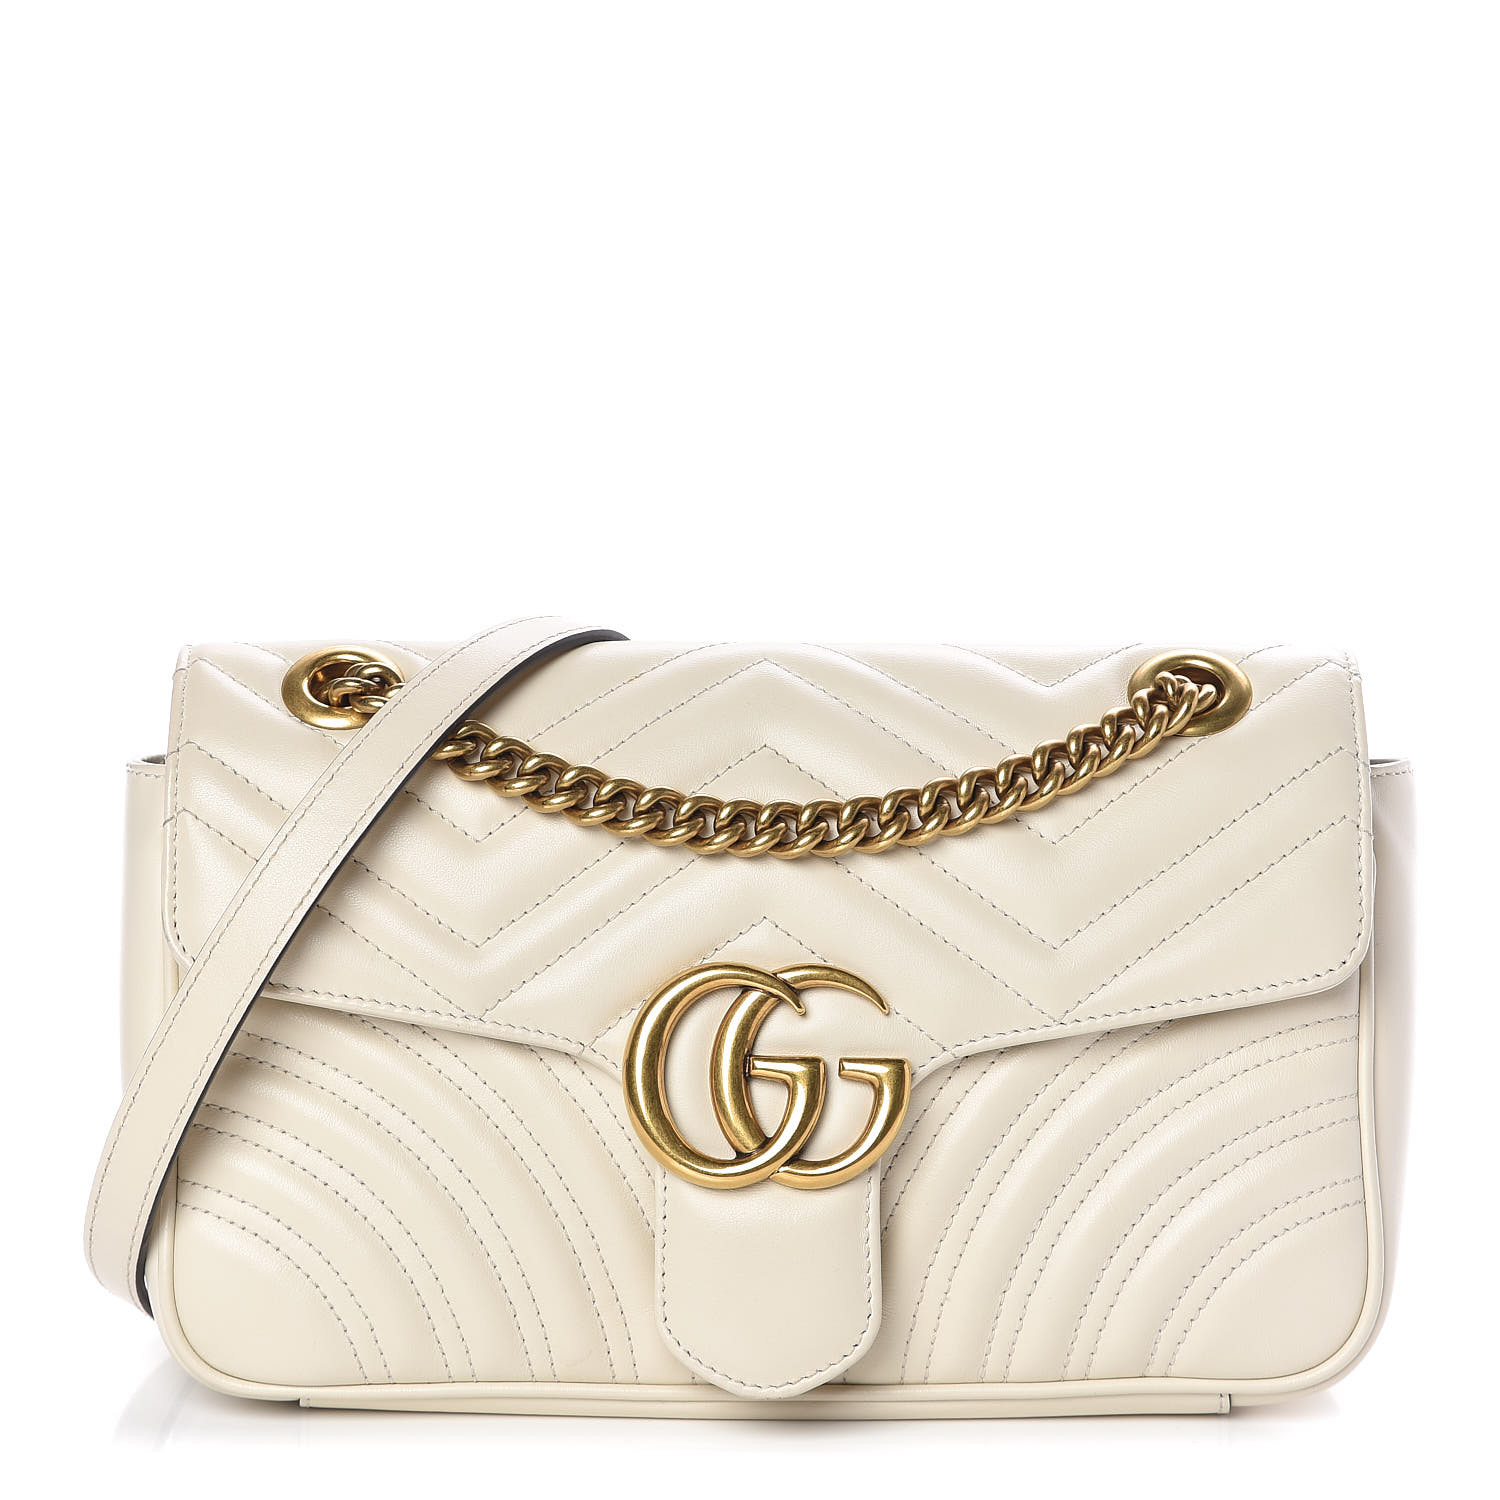 Gucci Marmont Flap Bag White - Oh My Handbags